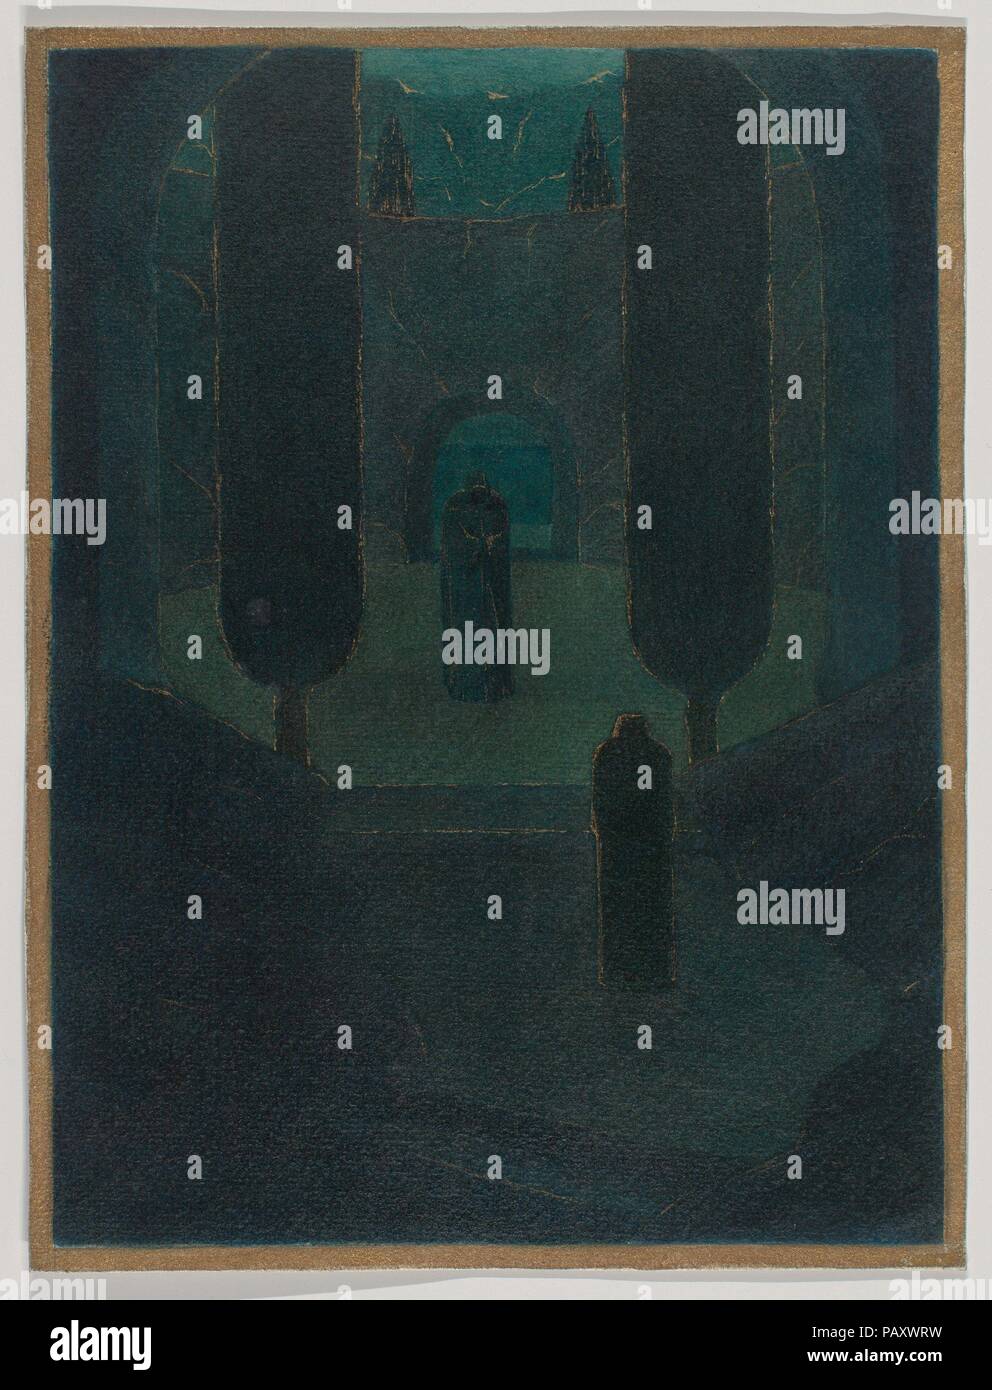 Cloaked Figures in a Dark Garden, possibly a stage set design. Artist: Herbert E. Crowley (British, London 1873-1939 Zurich). Dimensions: Sheet: 10 5/8 × 8 1/16 in. (27 × 20.4 cm). Date: 1911-24. Museum: Metropolitan Museum of Art, New York, USA. Stock Photo